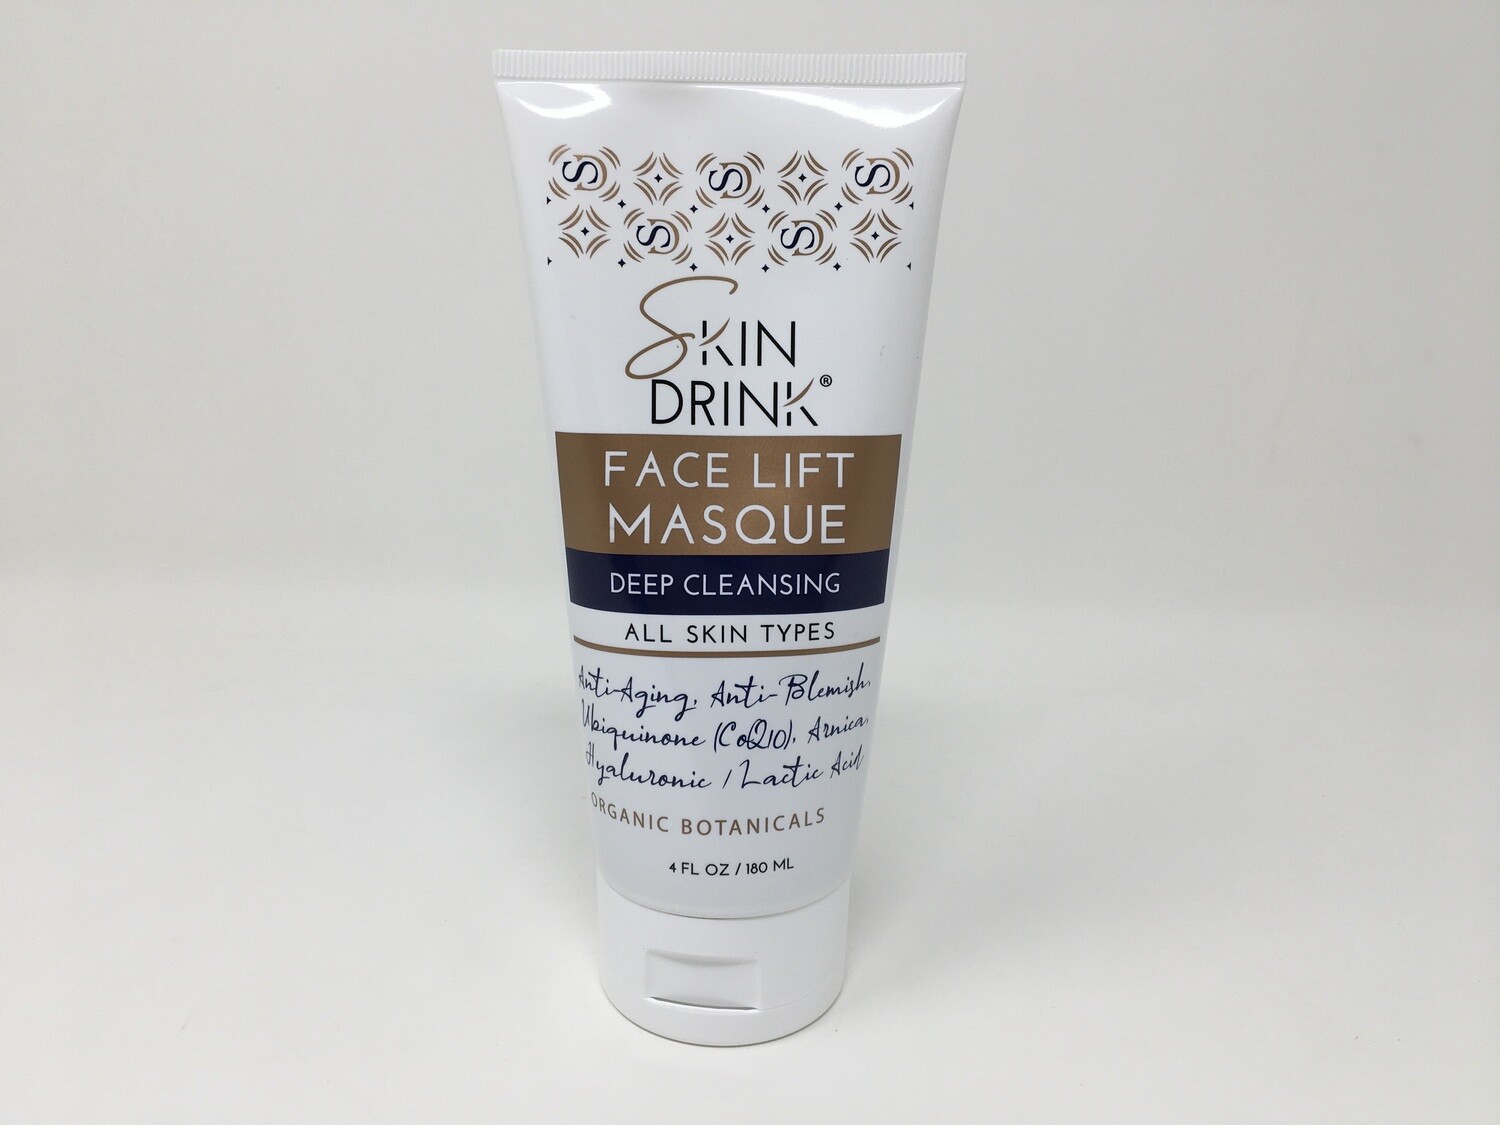 Deep Cleansing Face Lift Masque 4oz. (Skin Drink)